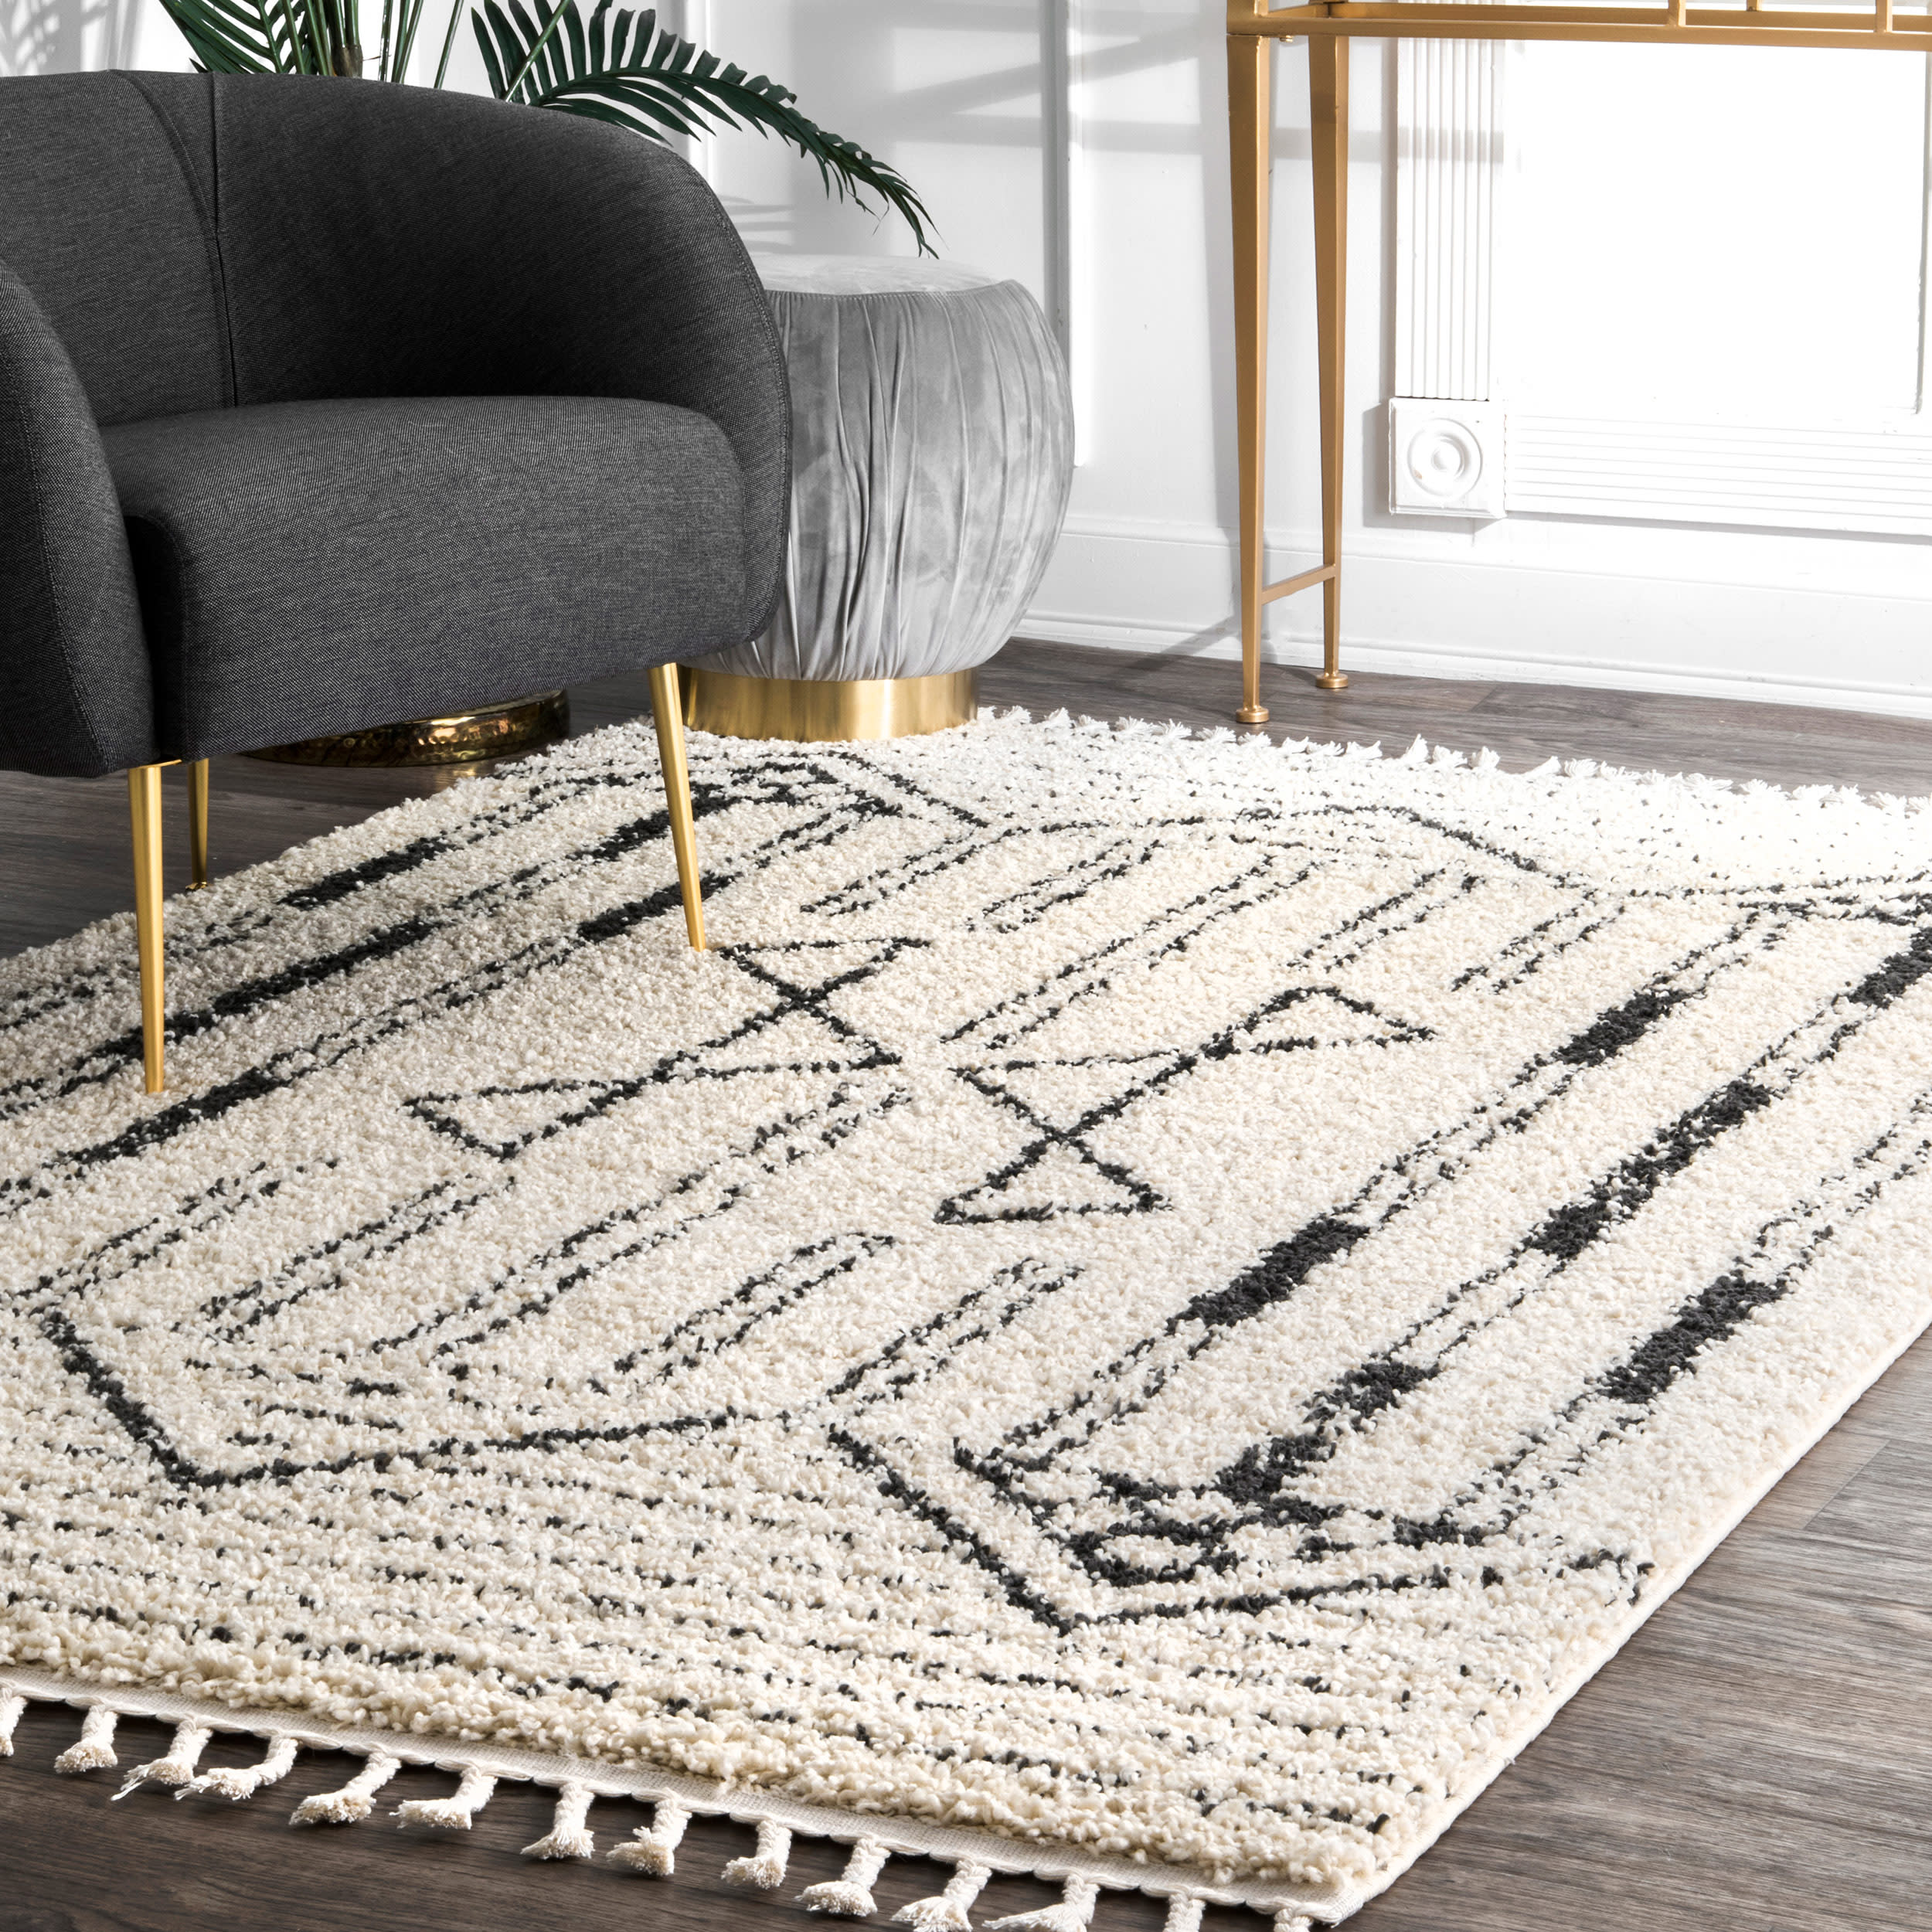 Transitional 4x6 Area Rug Shag Thick (4' x 5'3'') Geometric Dark Gray,  White Indoor Rectangle Easy to Clean 